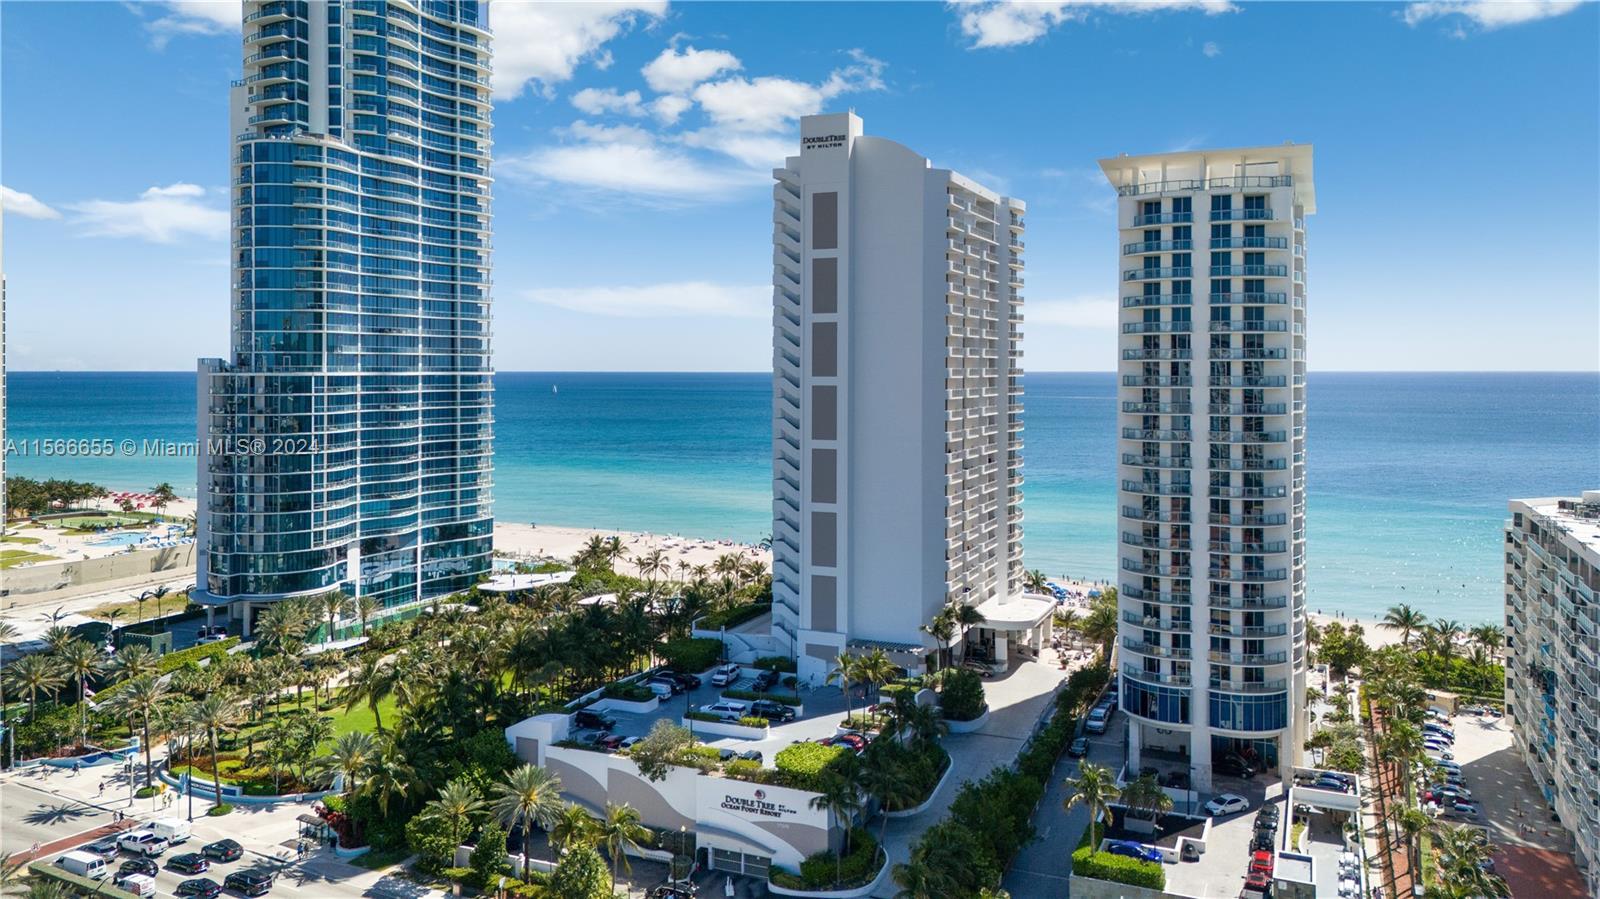 Experience breathtaking direct oceanfront views from this luxurious 2-bed, 2.5-bath condo hotel, off